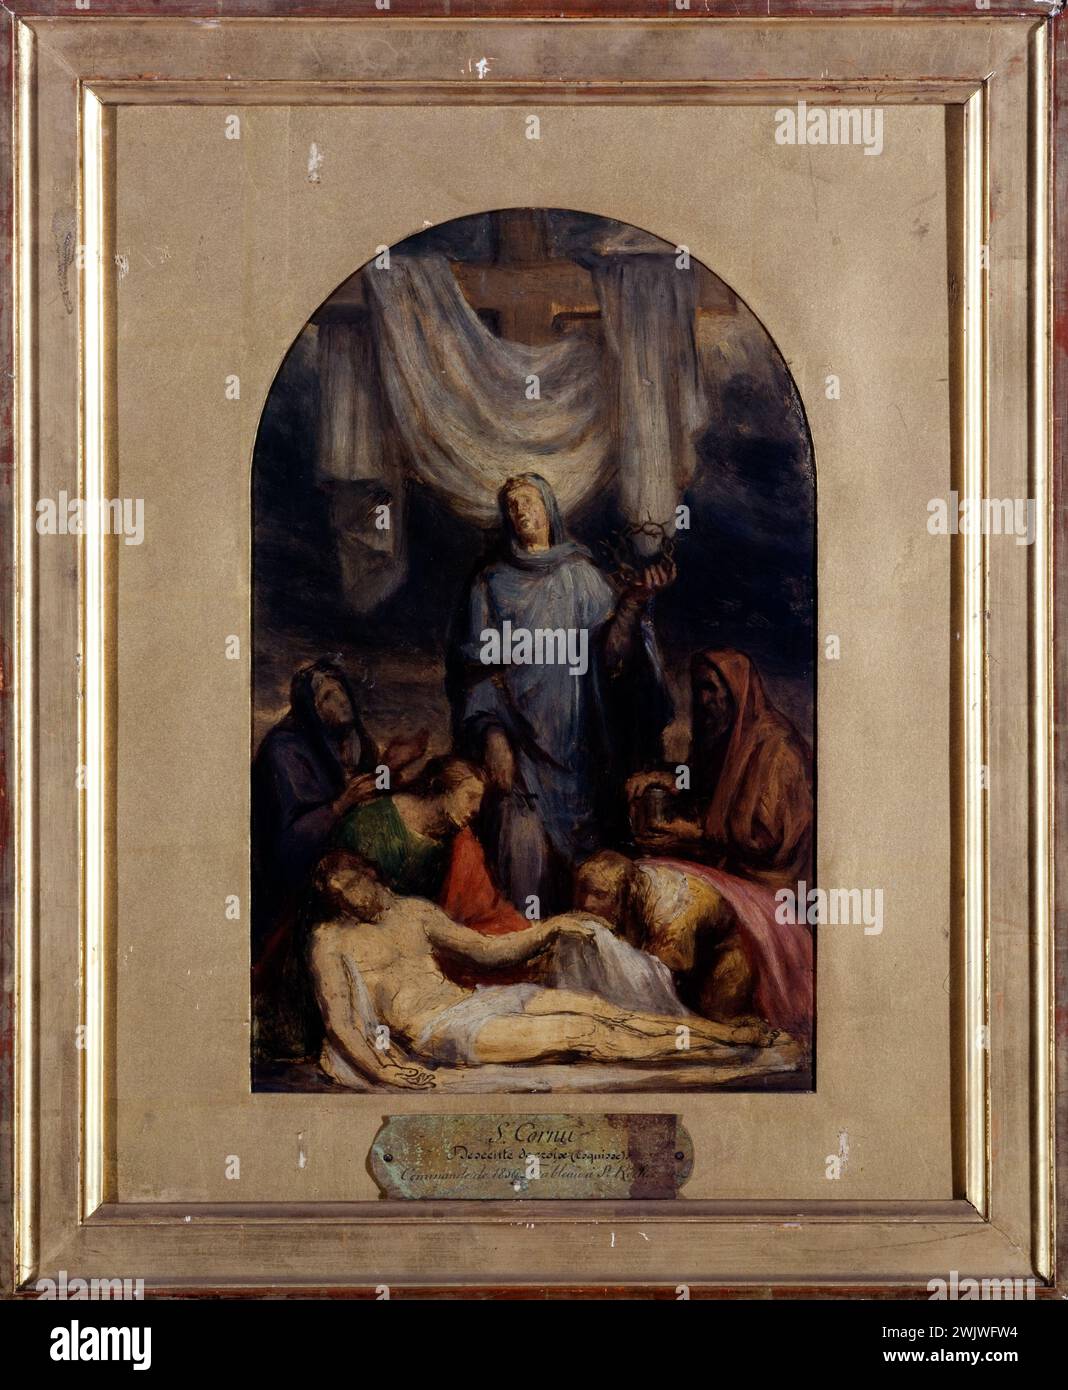 Sébastien Melchior Cornu (1804-1870). 'Jesus descended from the cross'. Sketch for the Saint-Roch church. Oil on wood (or metal?), 1860-1870. Museum of Fine Arts of the City of Paris, Petit Palais. 52011-3 Cadver, Catholic, Christian Chretian, Crown Epine Epines, Deposition, Cross descent, Saint-Roch Church, Sketch, Wood Oil, Painful Mysteria, New Testament, Passion, Biblical Scene Stock Photo